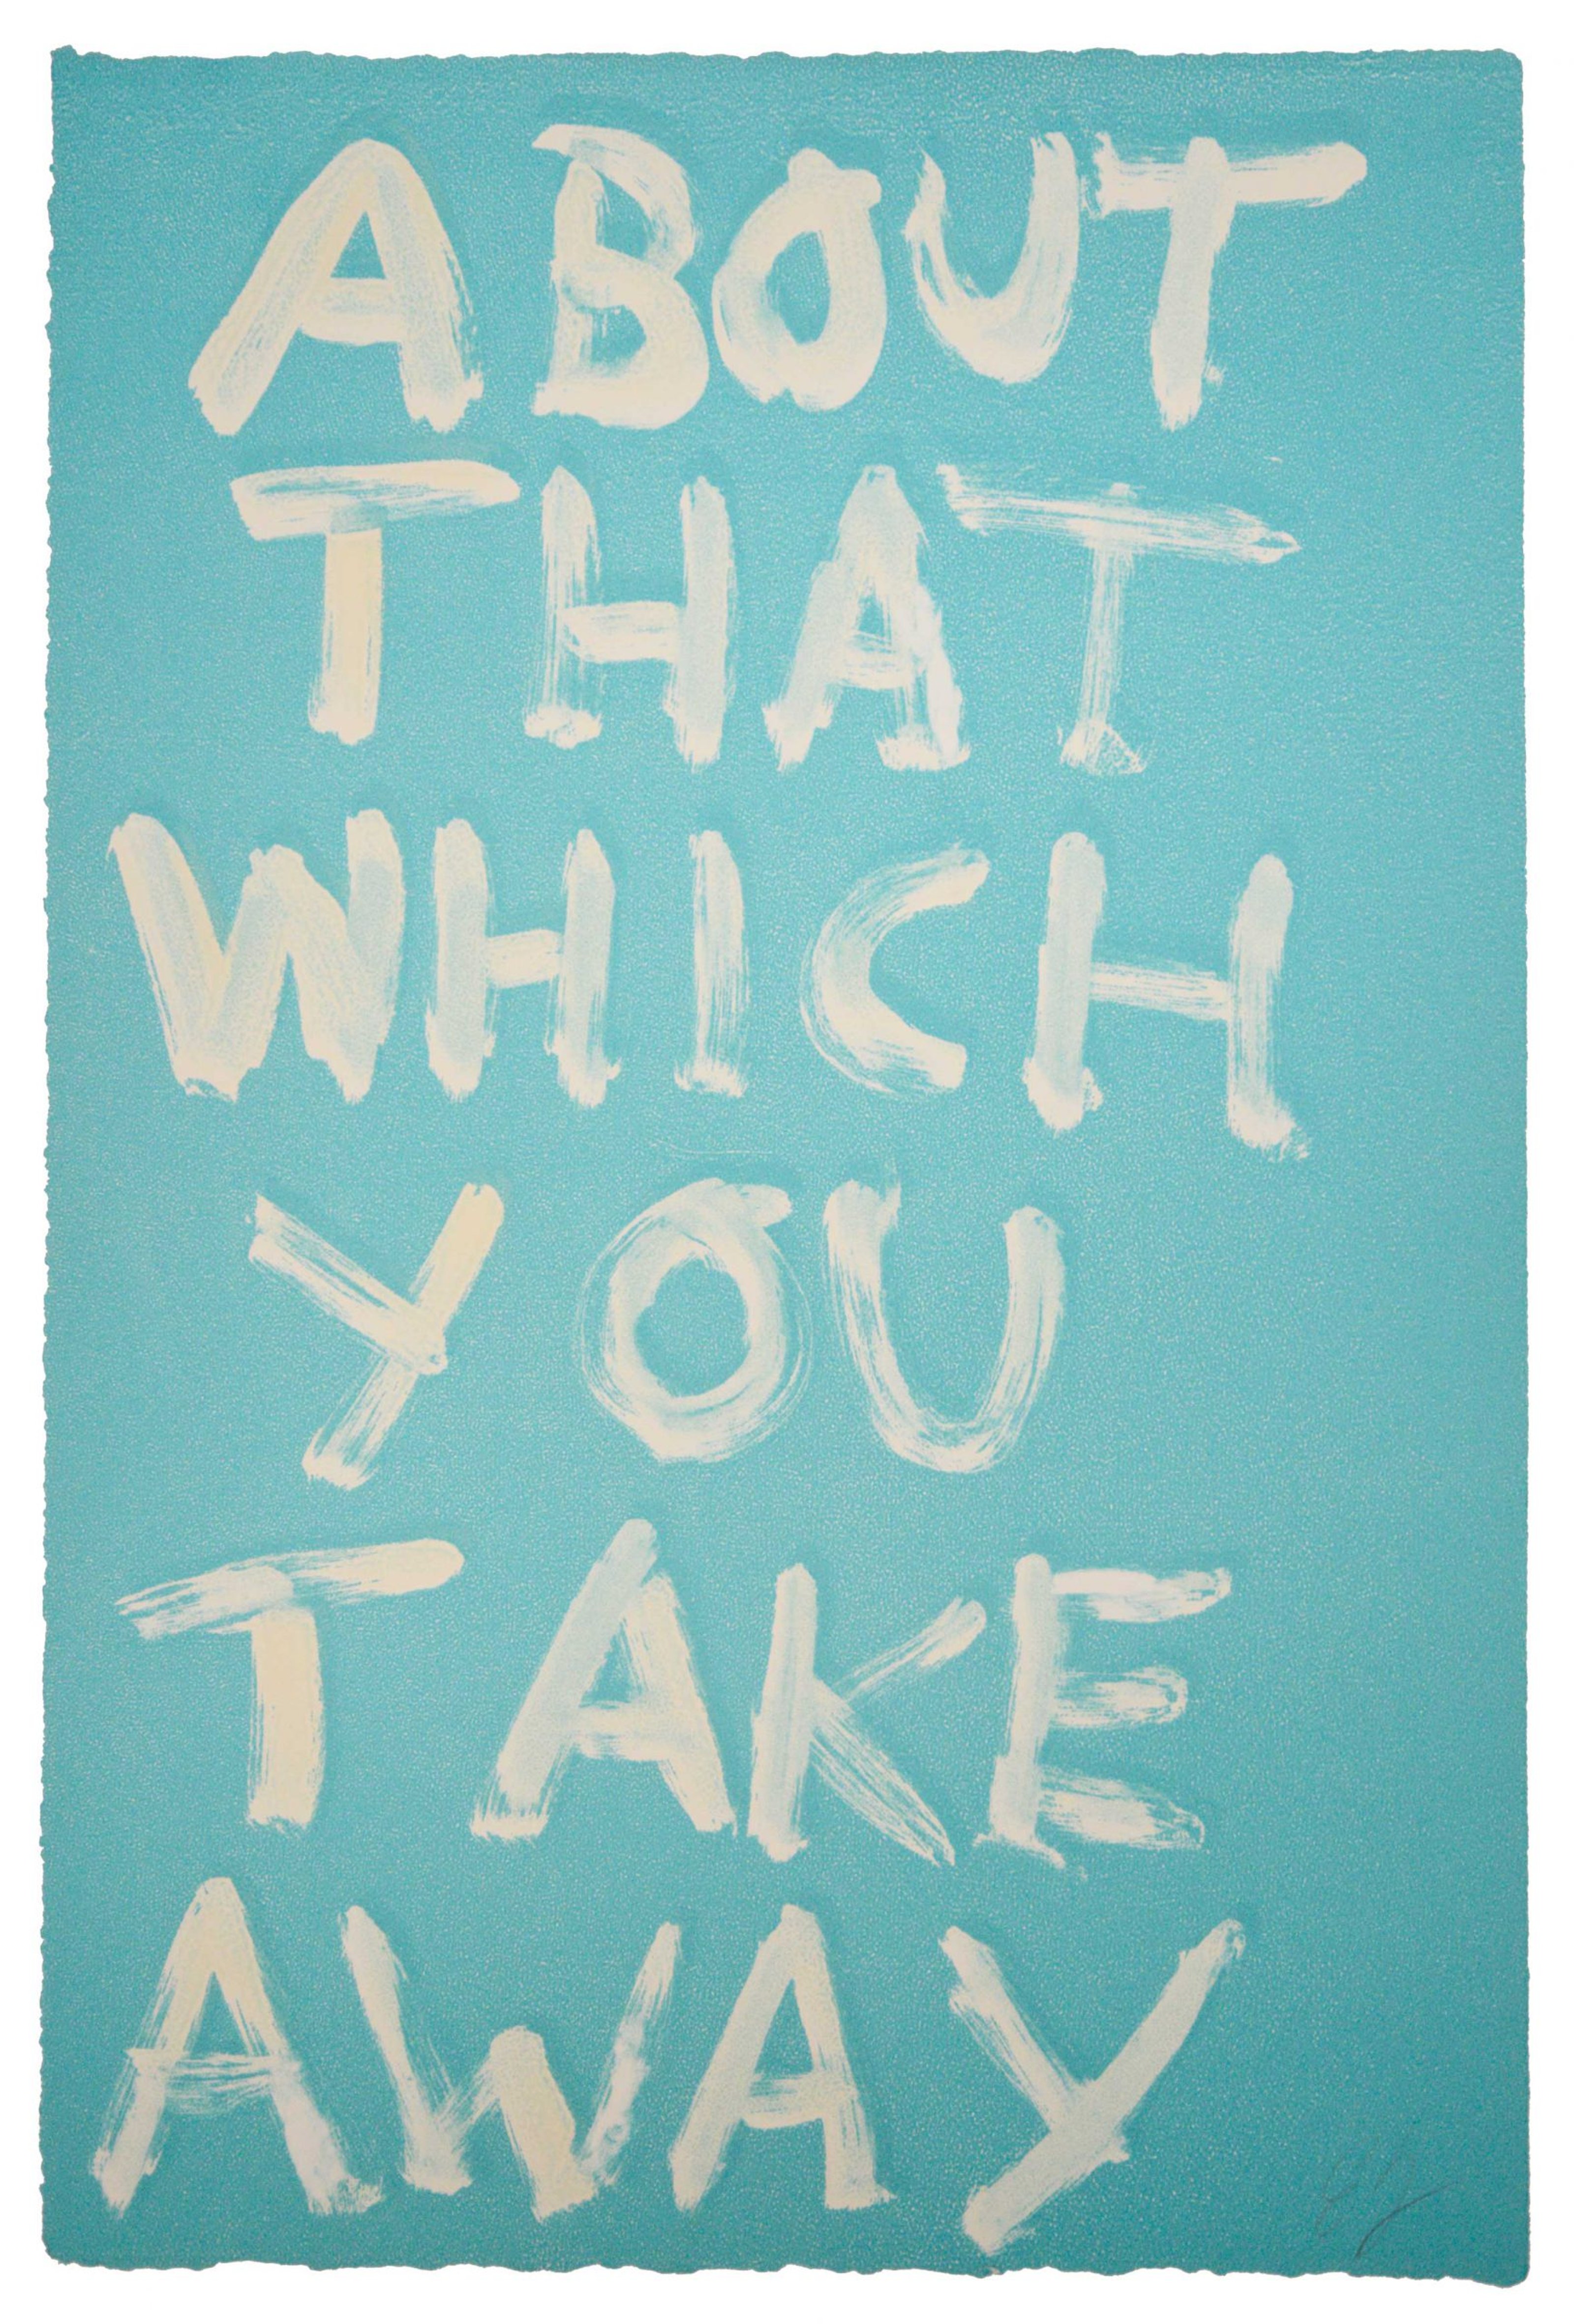 Print: About That Which You Take Away